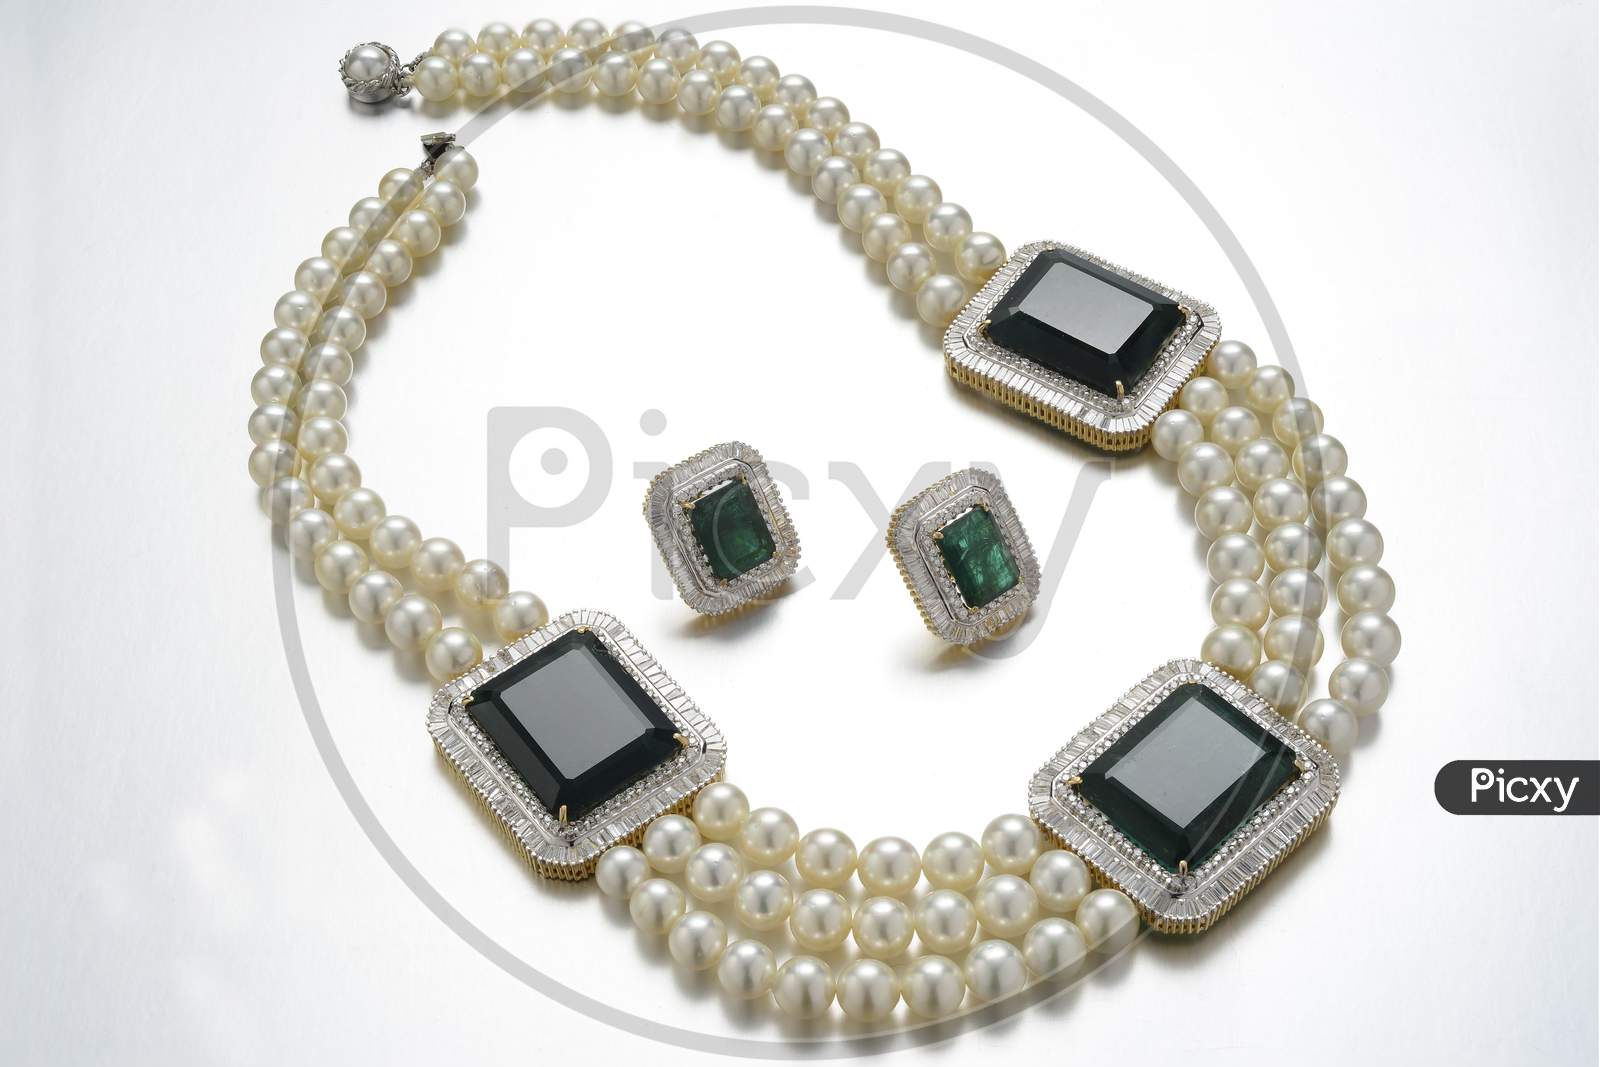 Pearl necklace set with earrings